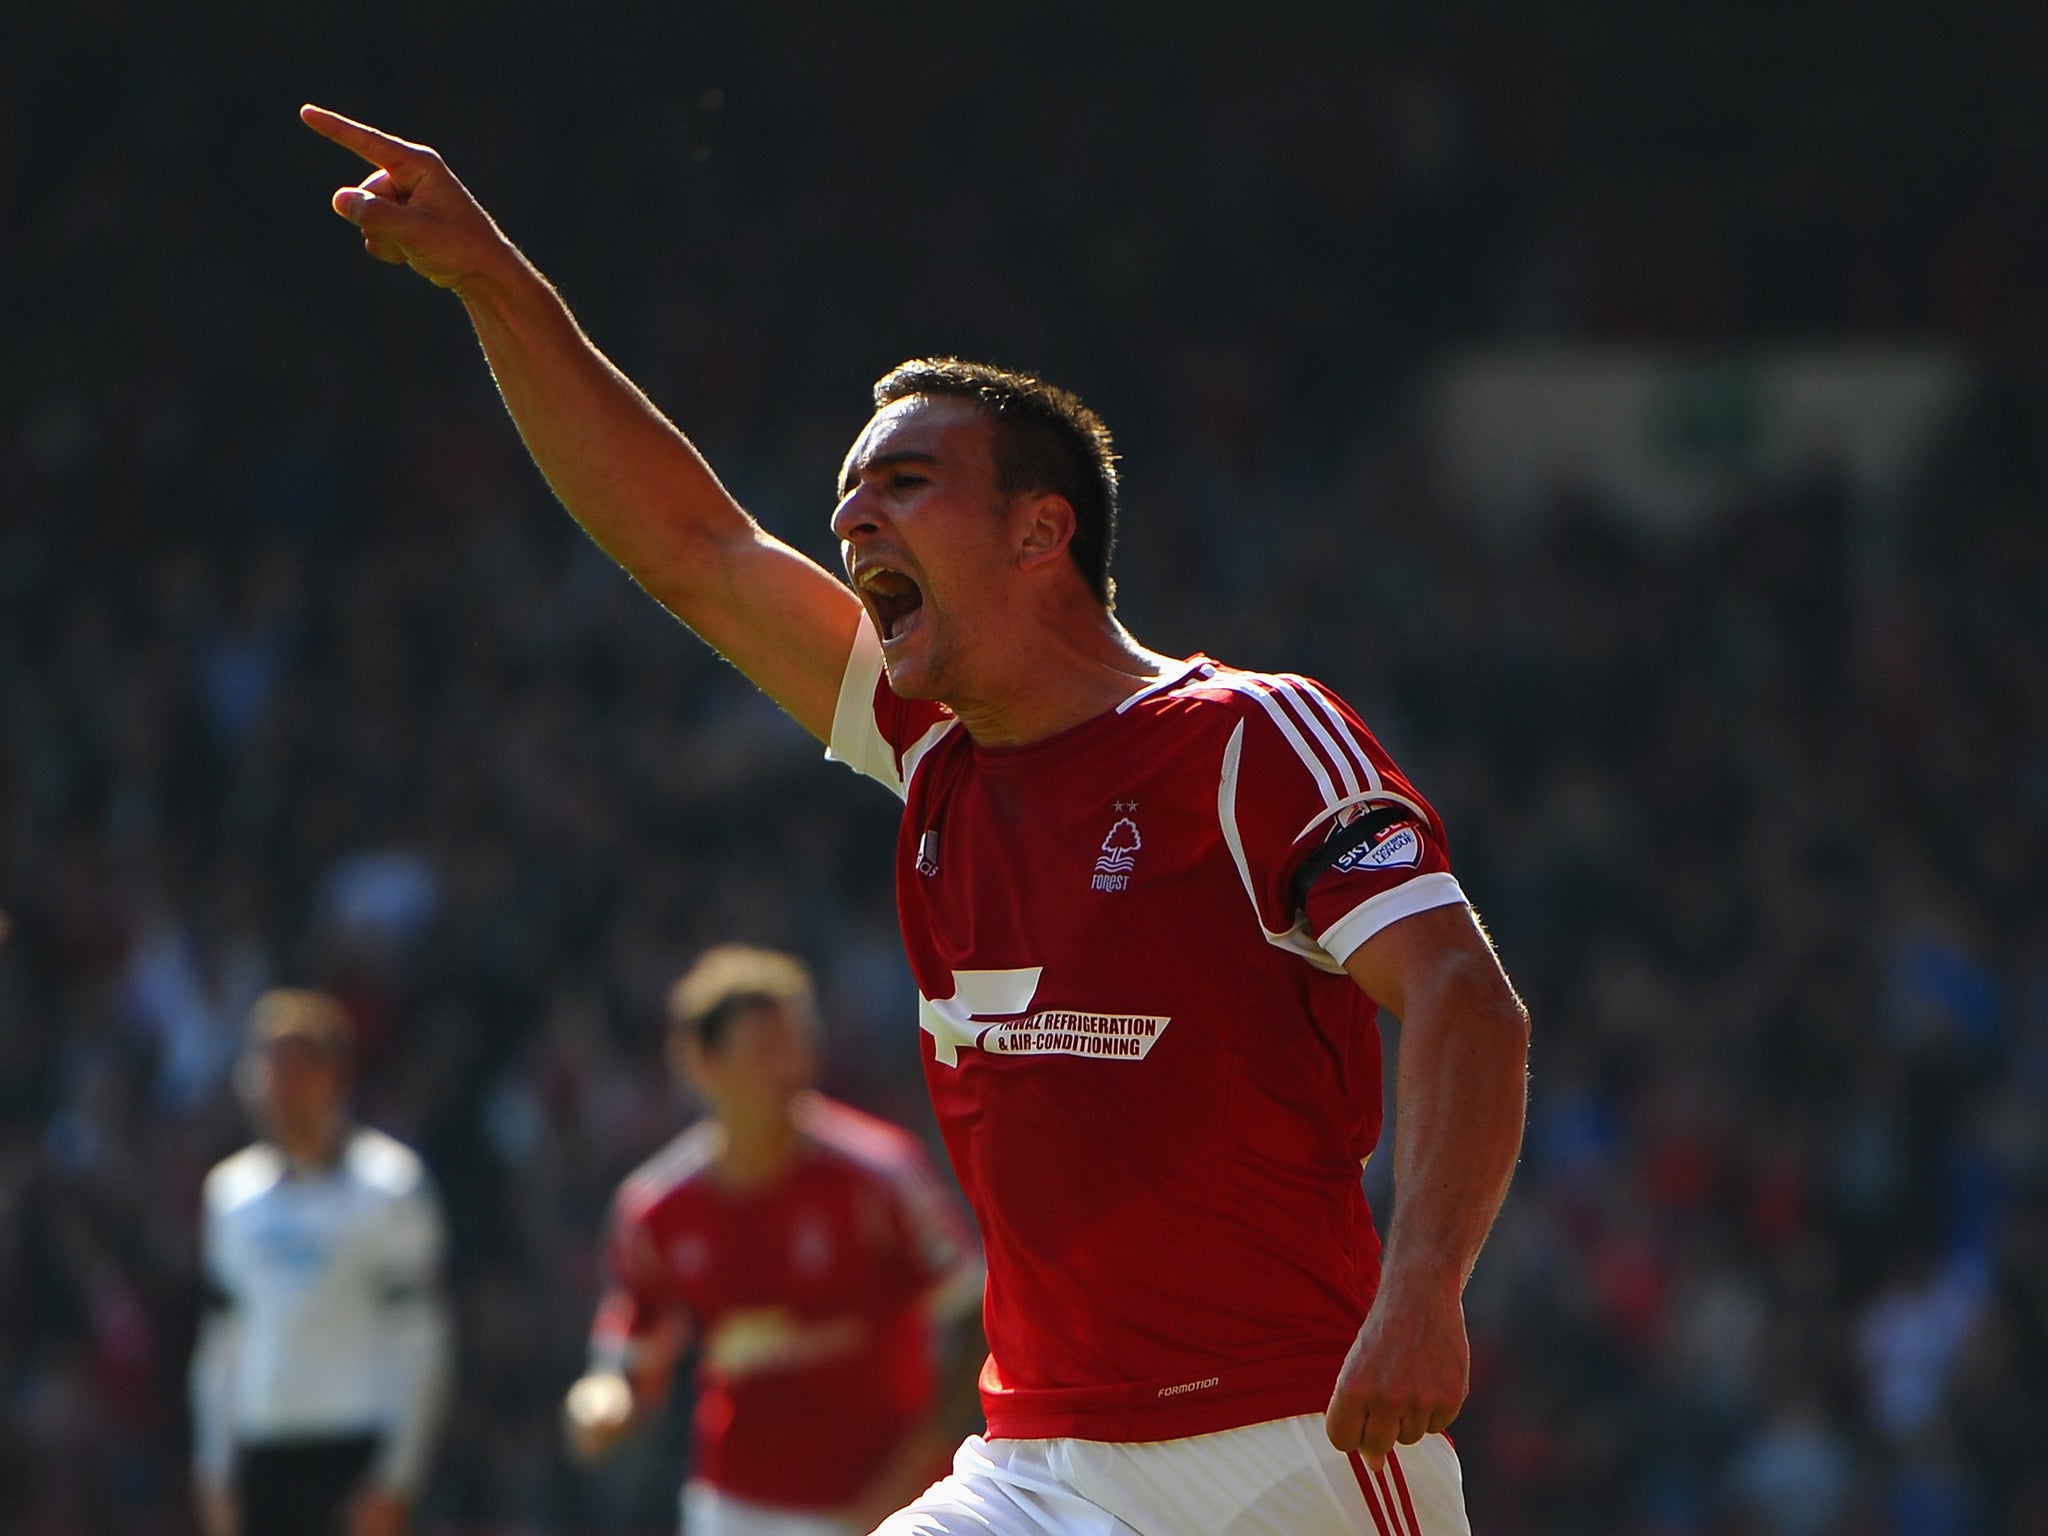 Jack Hobbs gave Nottingham Forest a 1-0 victory over Derby County